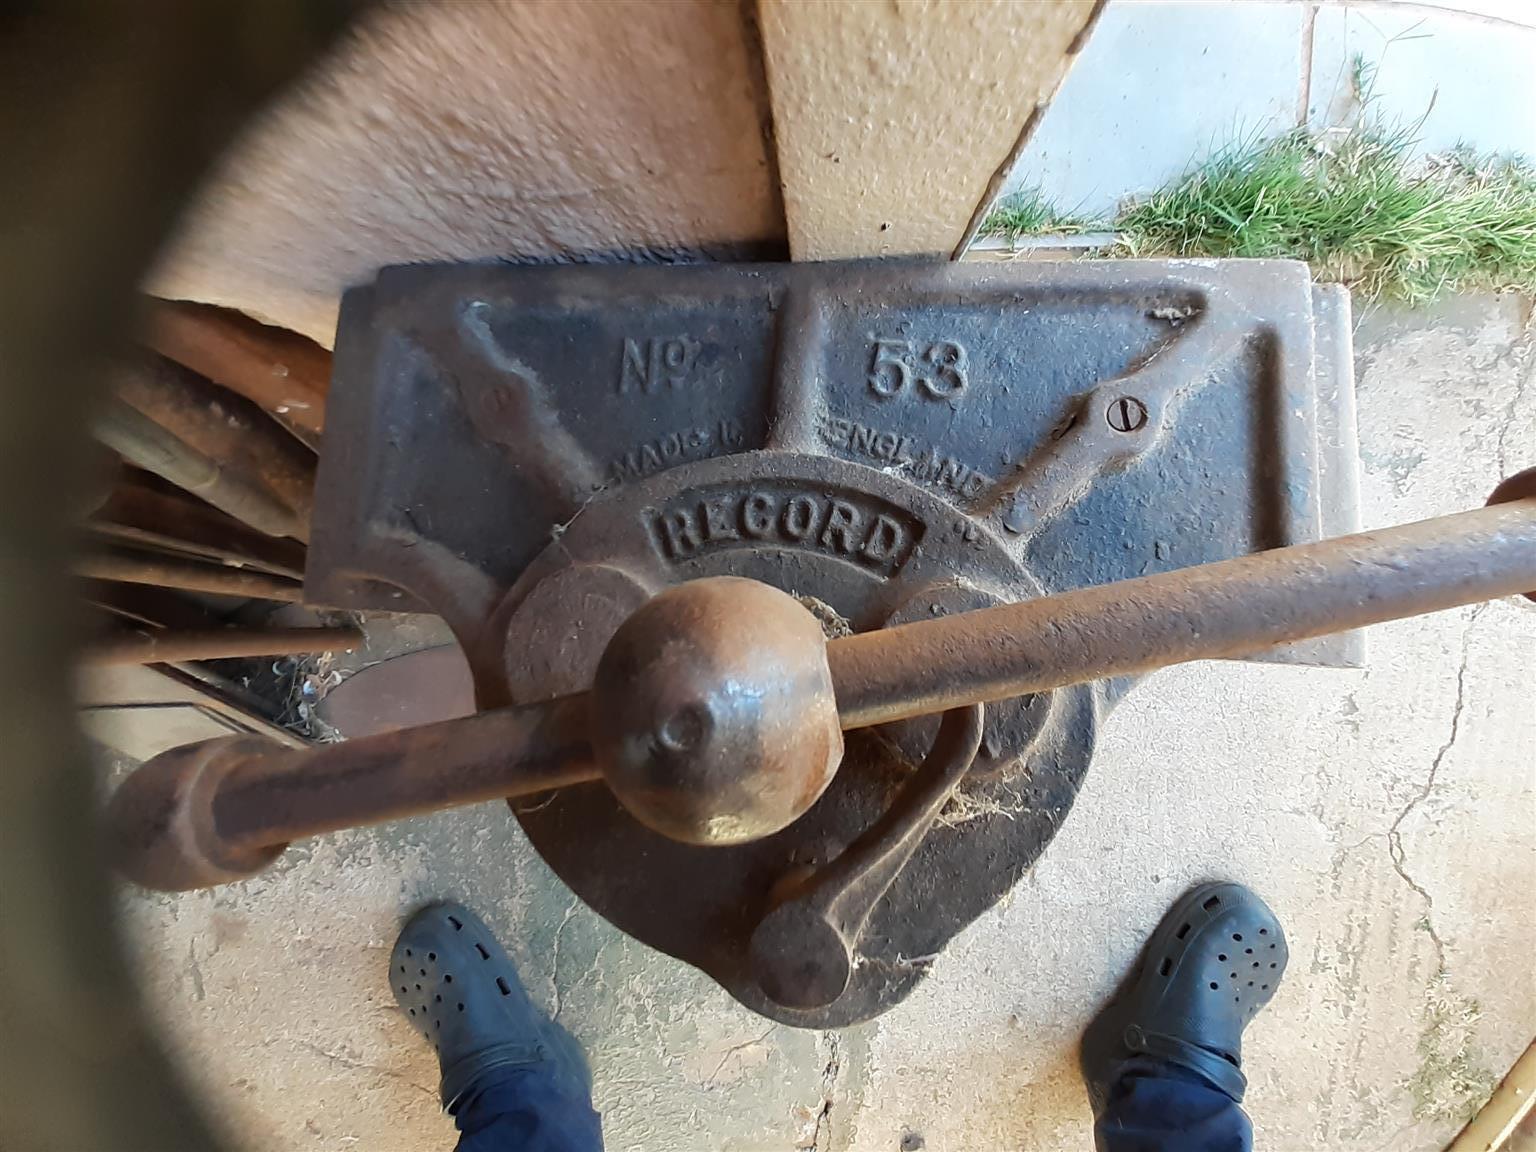 Record 53 woodworkers bench vise